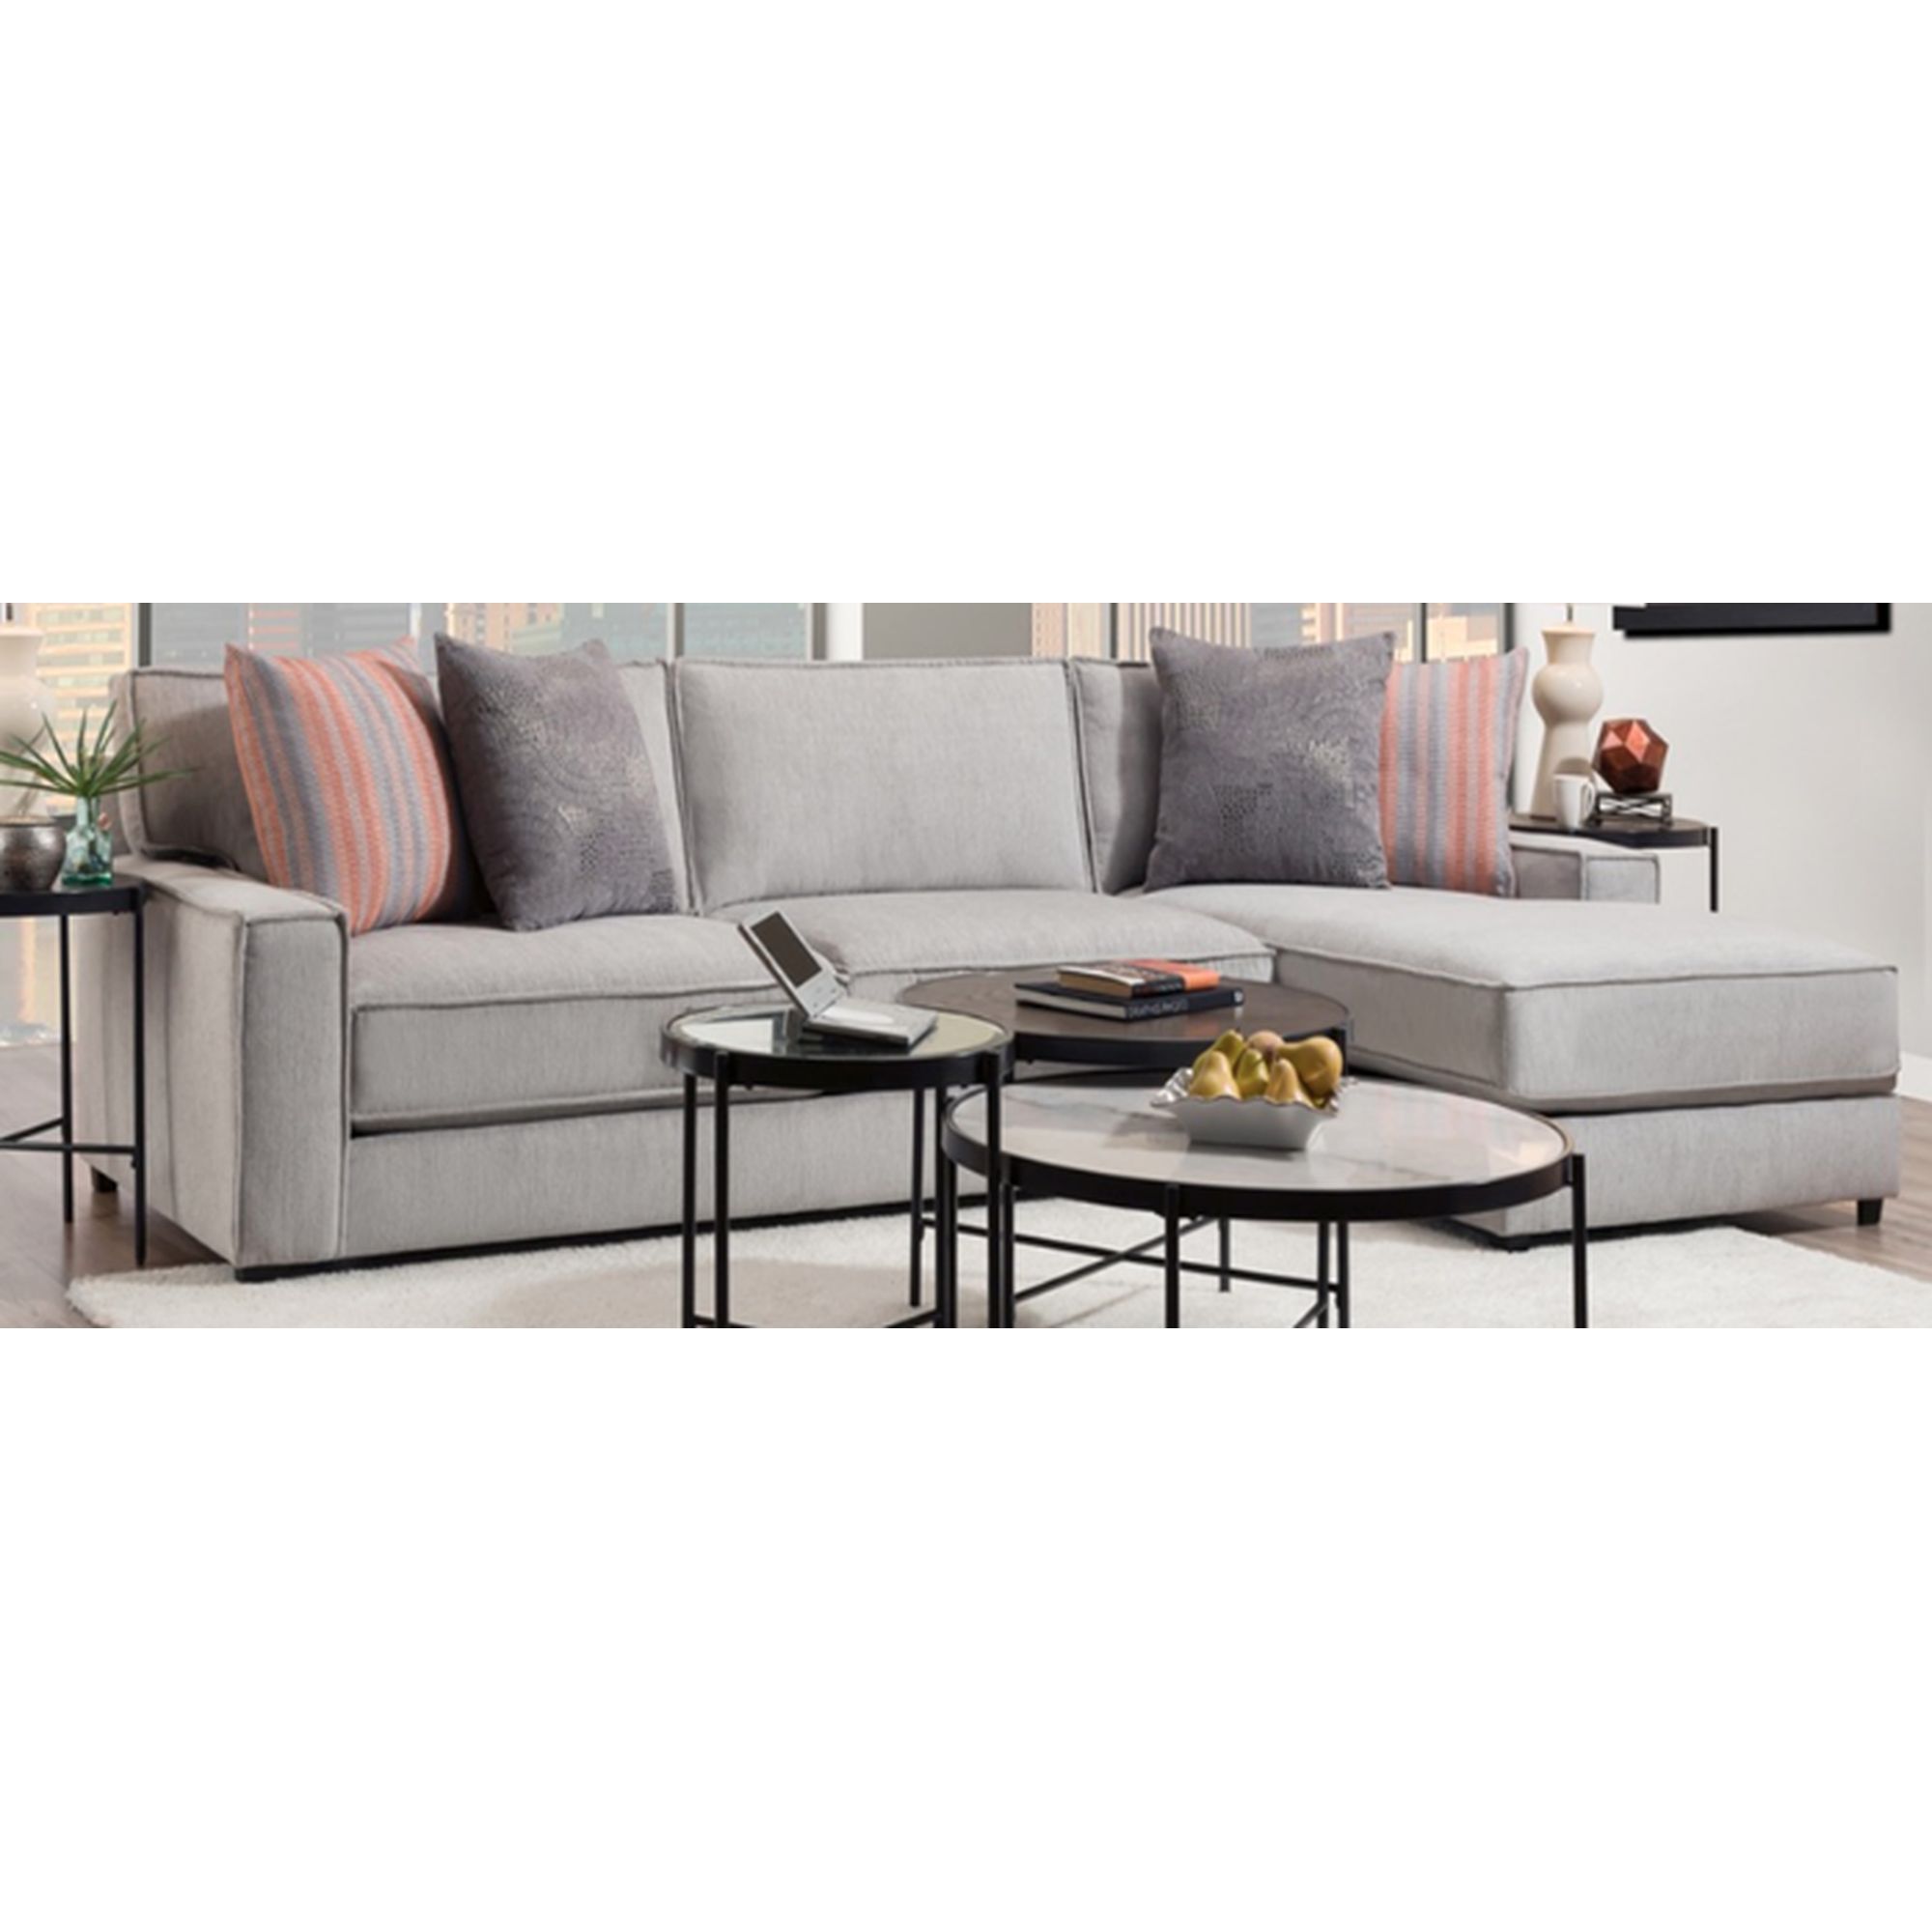 572 - Sectional LHF Loveseat in Candor Ash with Marlow Orange and Roulette Smoke Pillows